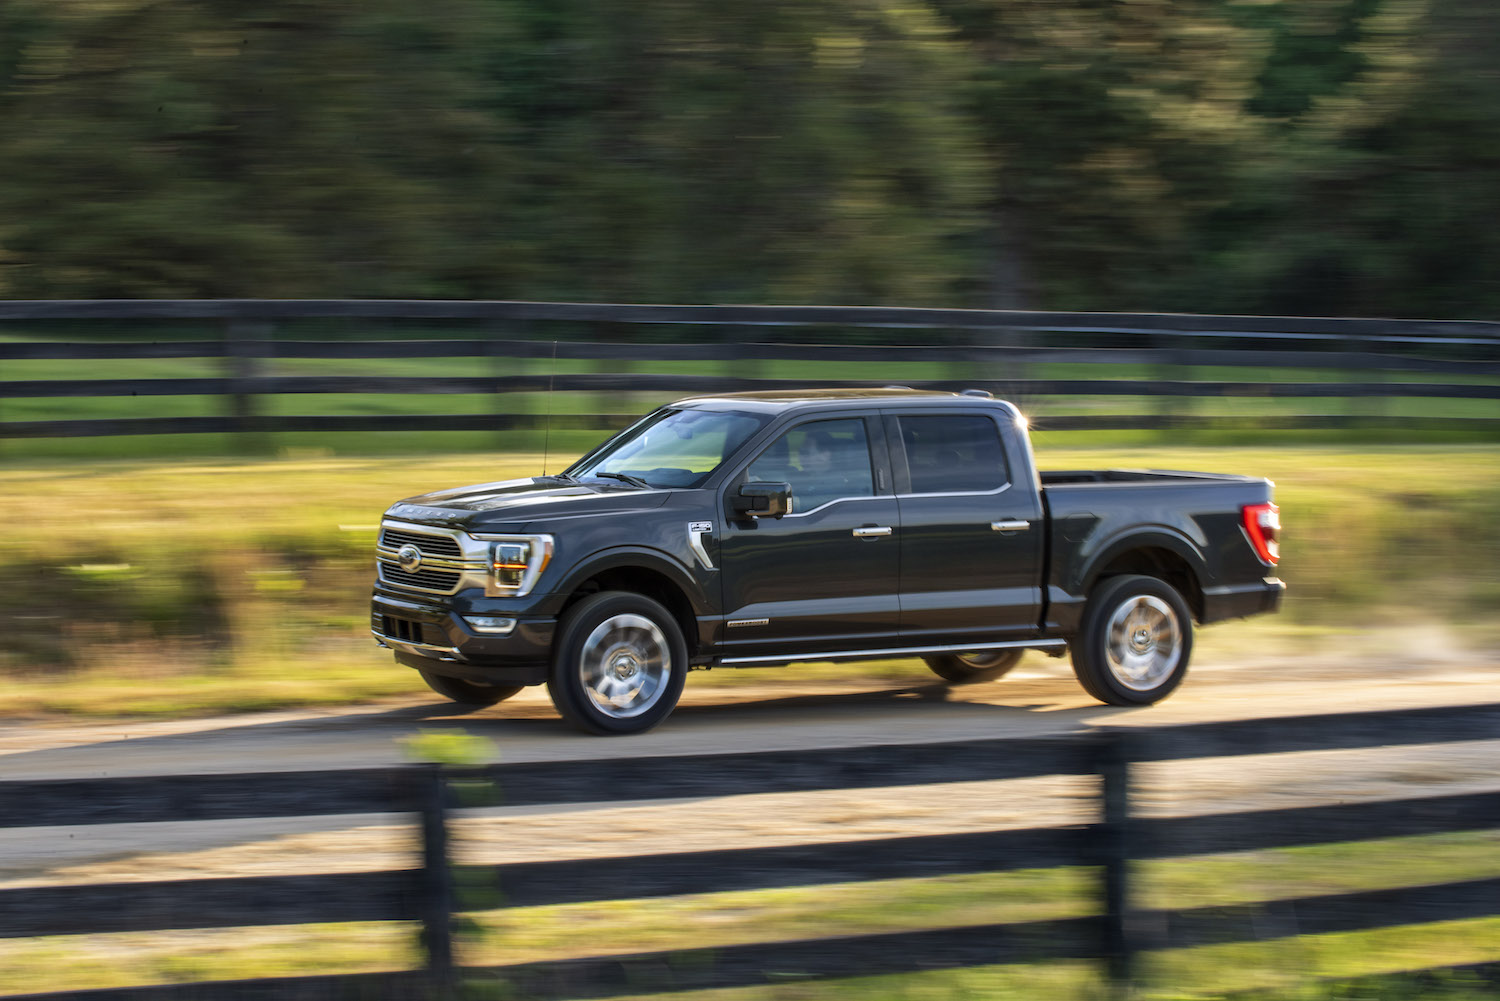 Promo photo of a dark gray Ford F-150 powerboost hybrid truck driving down a country road with a fence in the background.